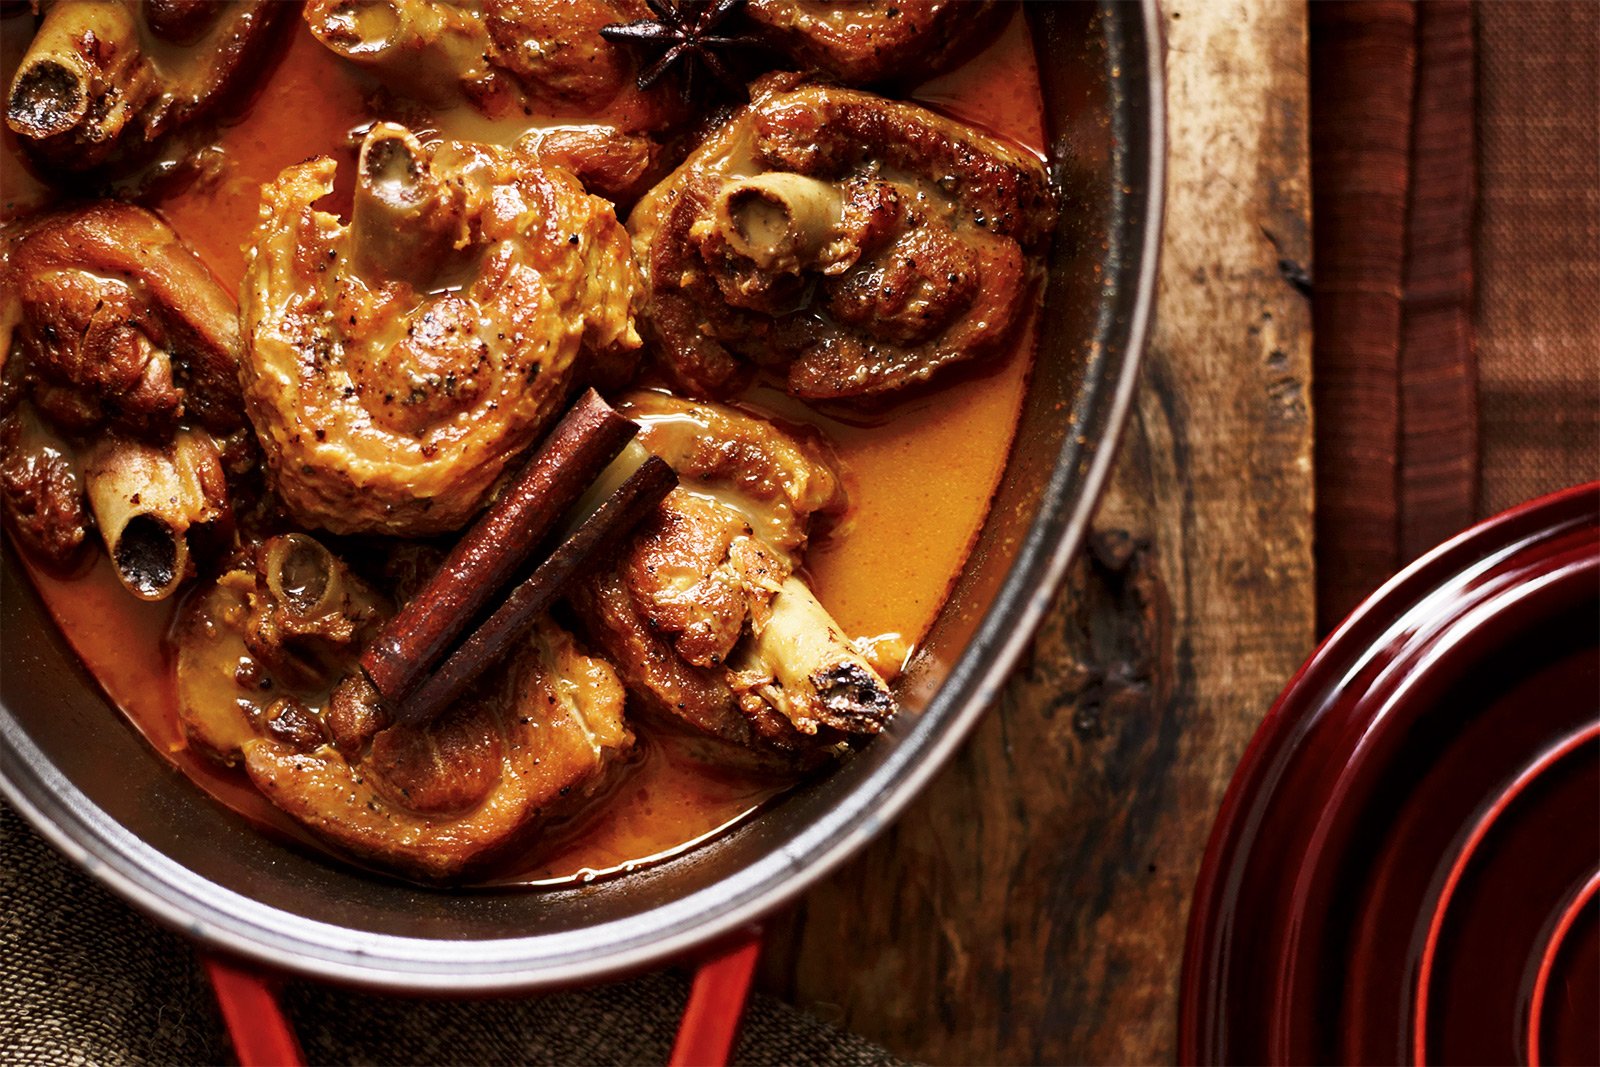 How to try ossobuco in Milan